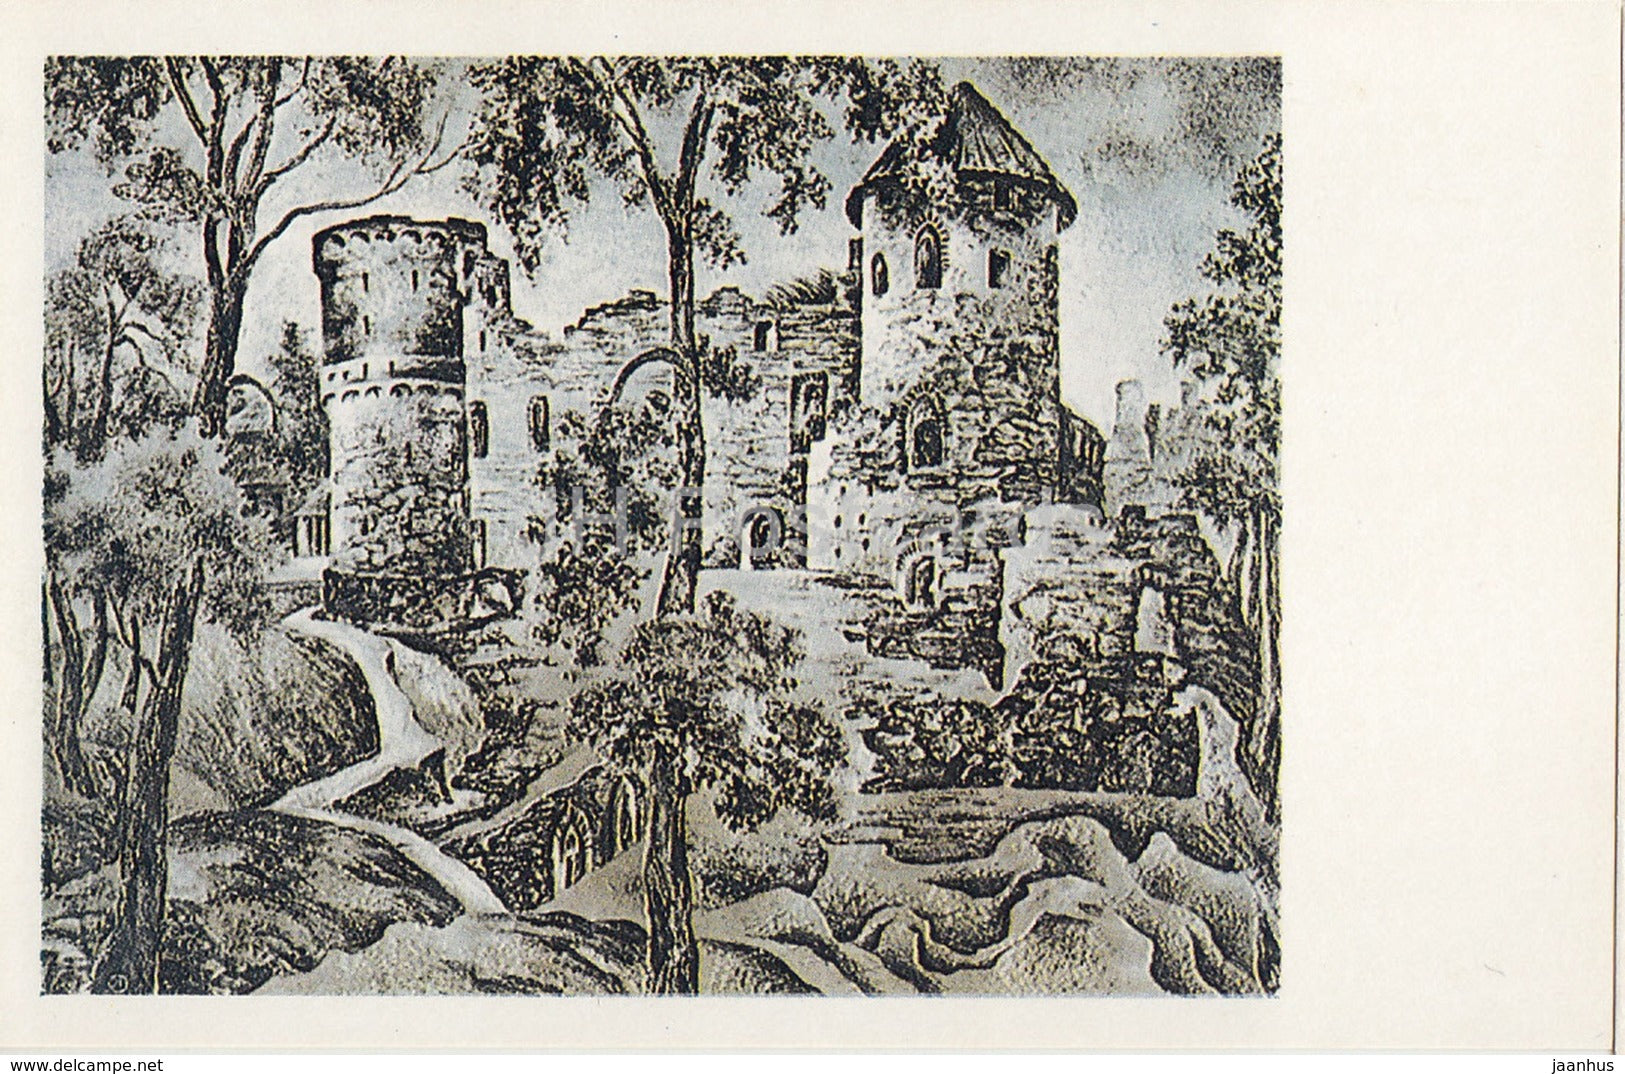 Lithography by R. Opmane - The Castle ruins in Cesis - latvian art - Gauja National Park - 1982 - Latvia USSR - unused - JH Postcards